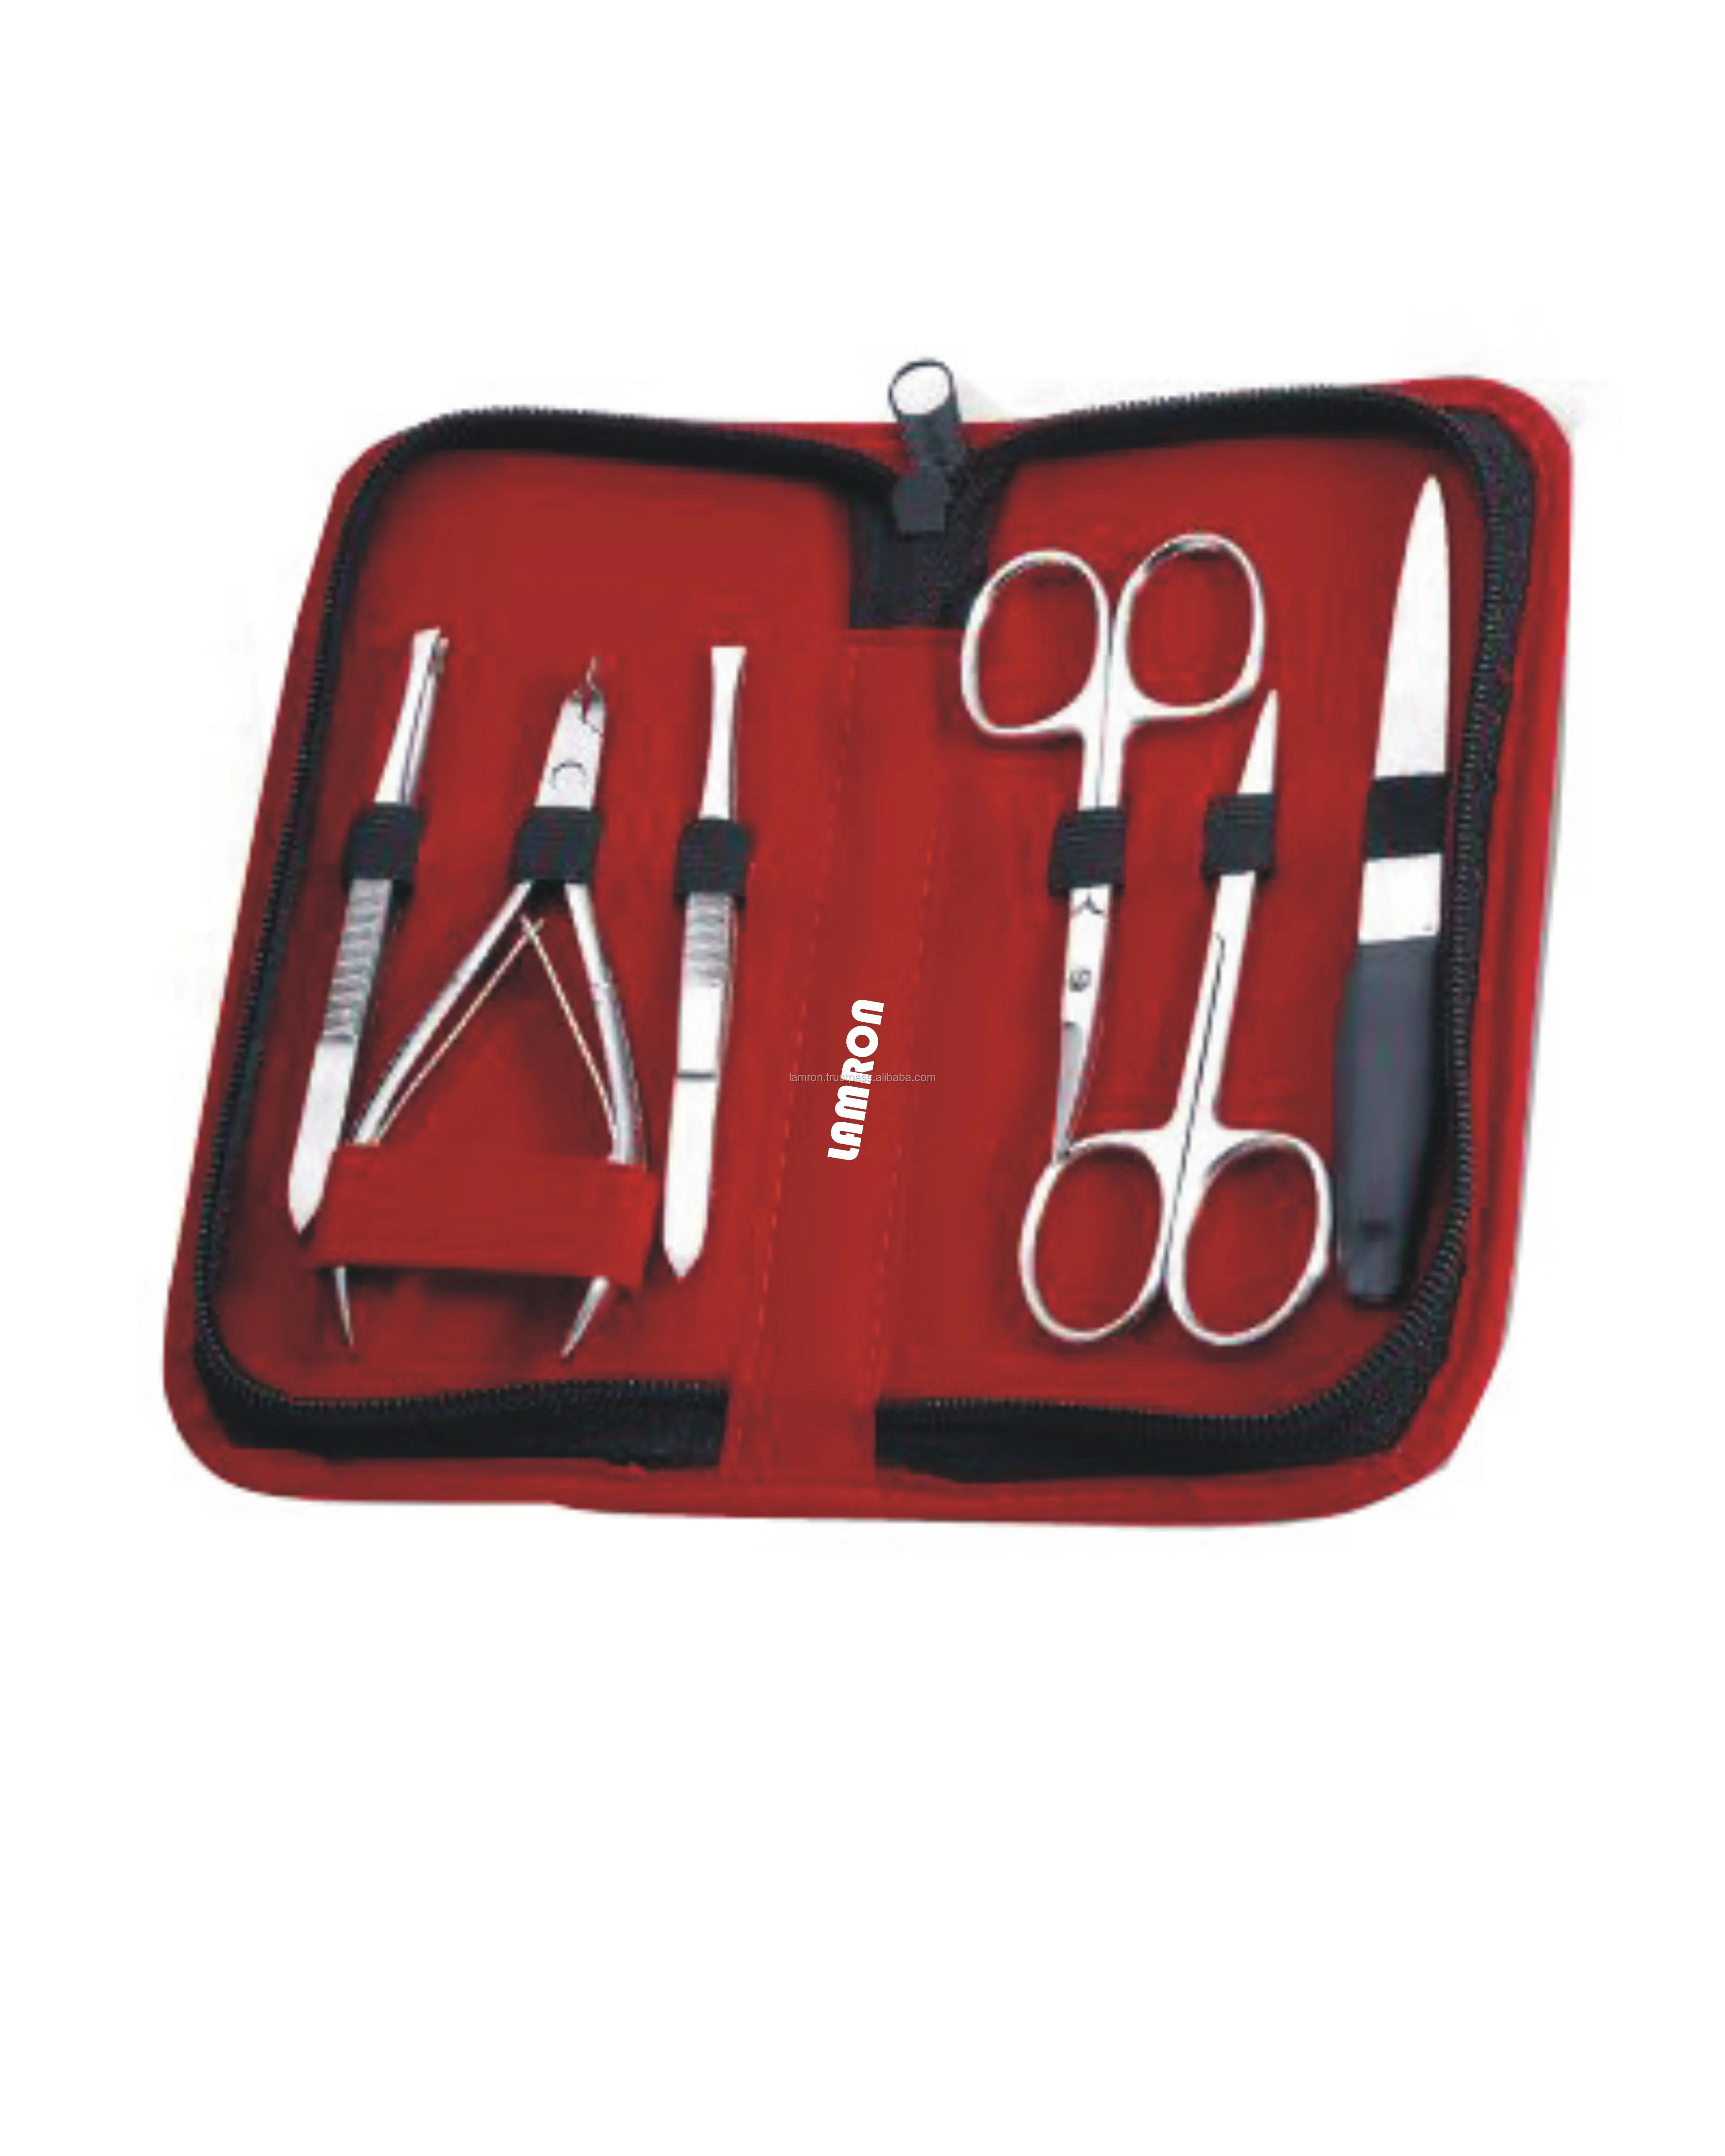 Manicure Beauty Tools Kit Including Nail Nippers,Scissors,Pushers,Files ...